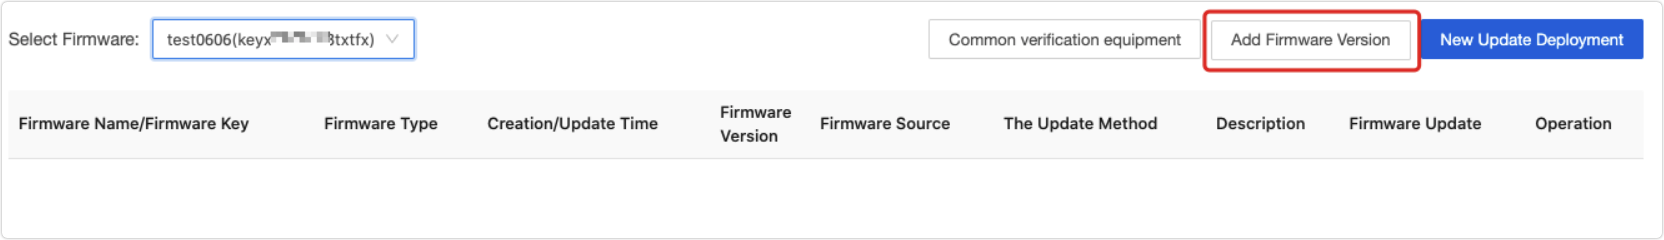 Manage Firmware